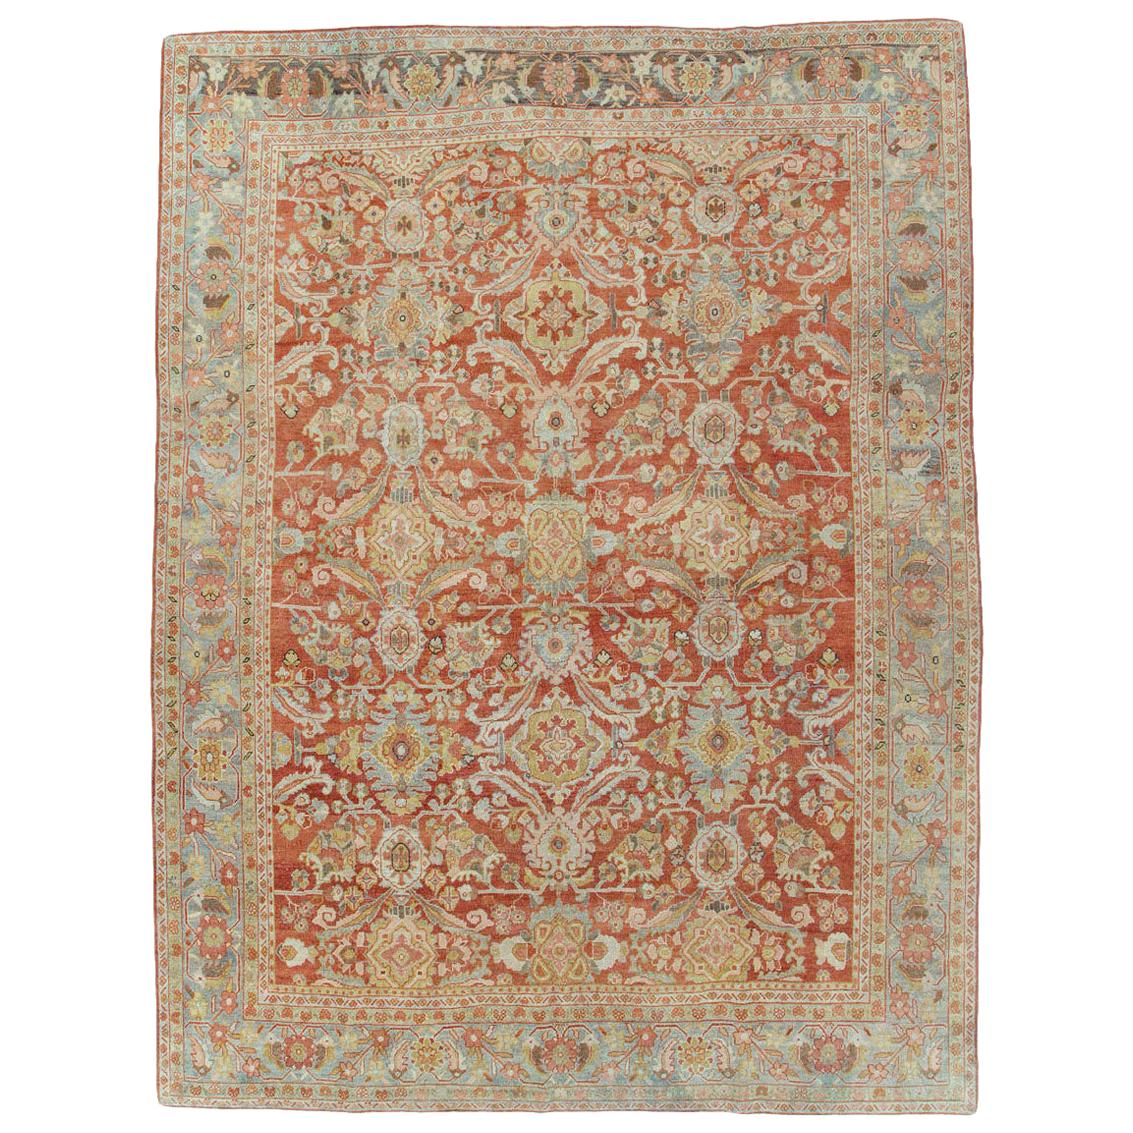 Early 20th Century Handmade Persian Mahal Room Size Carpet in Rust & Slate Blue For Sale